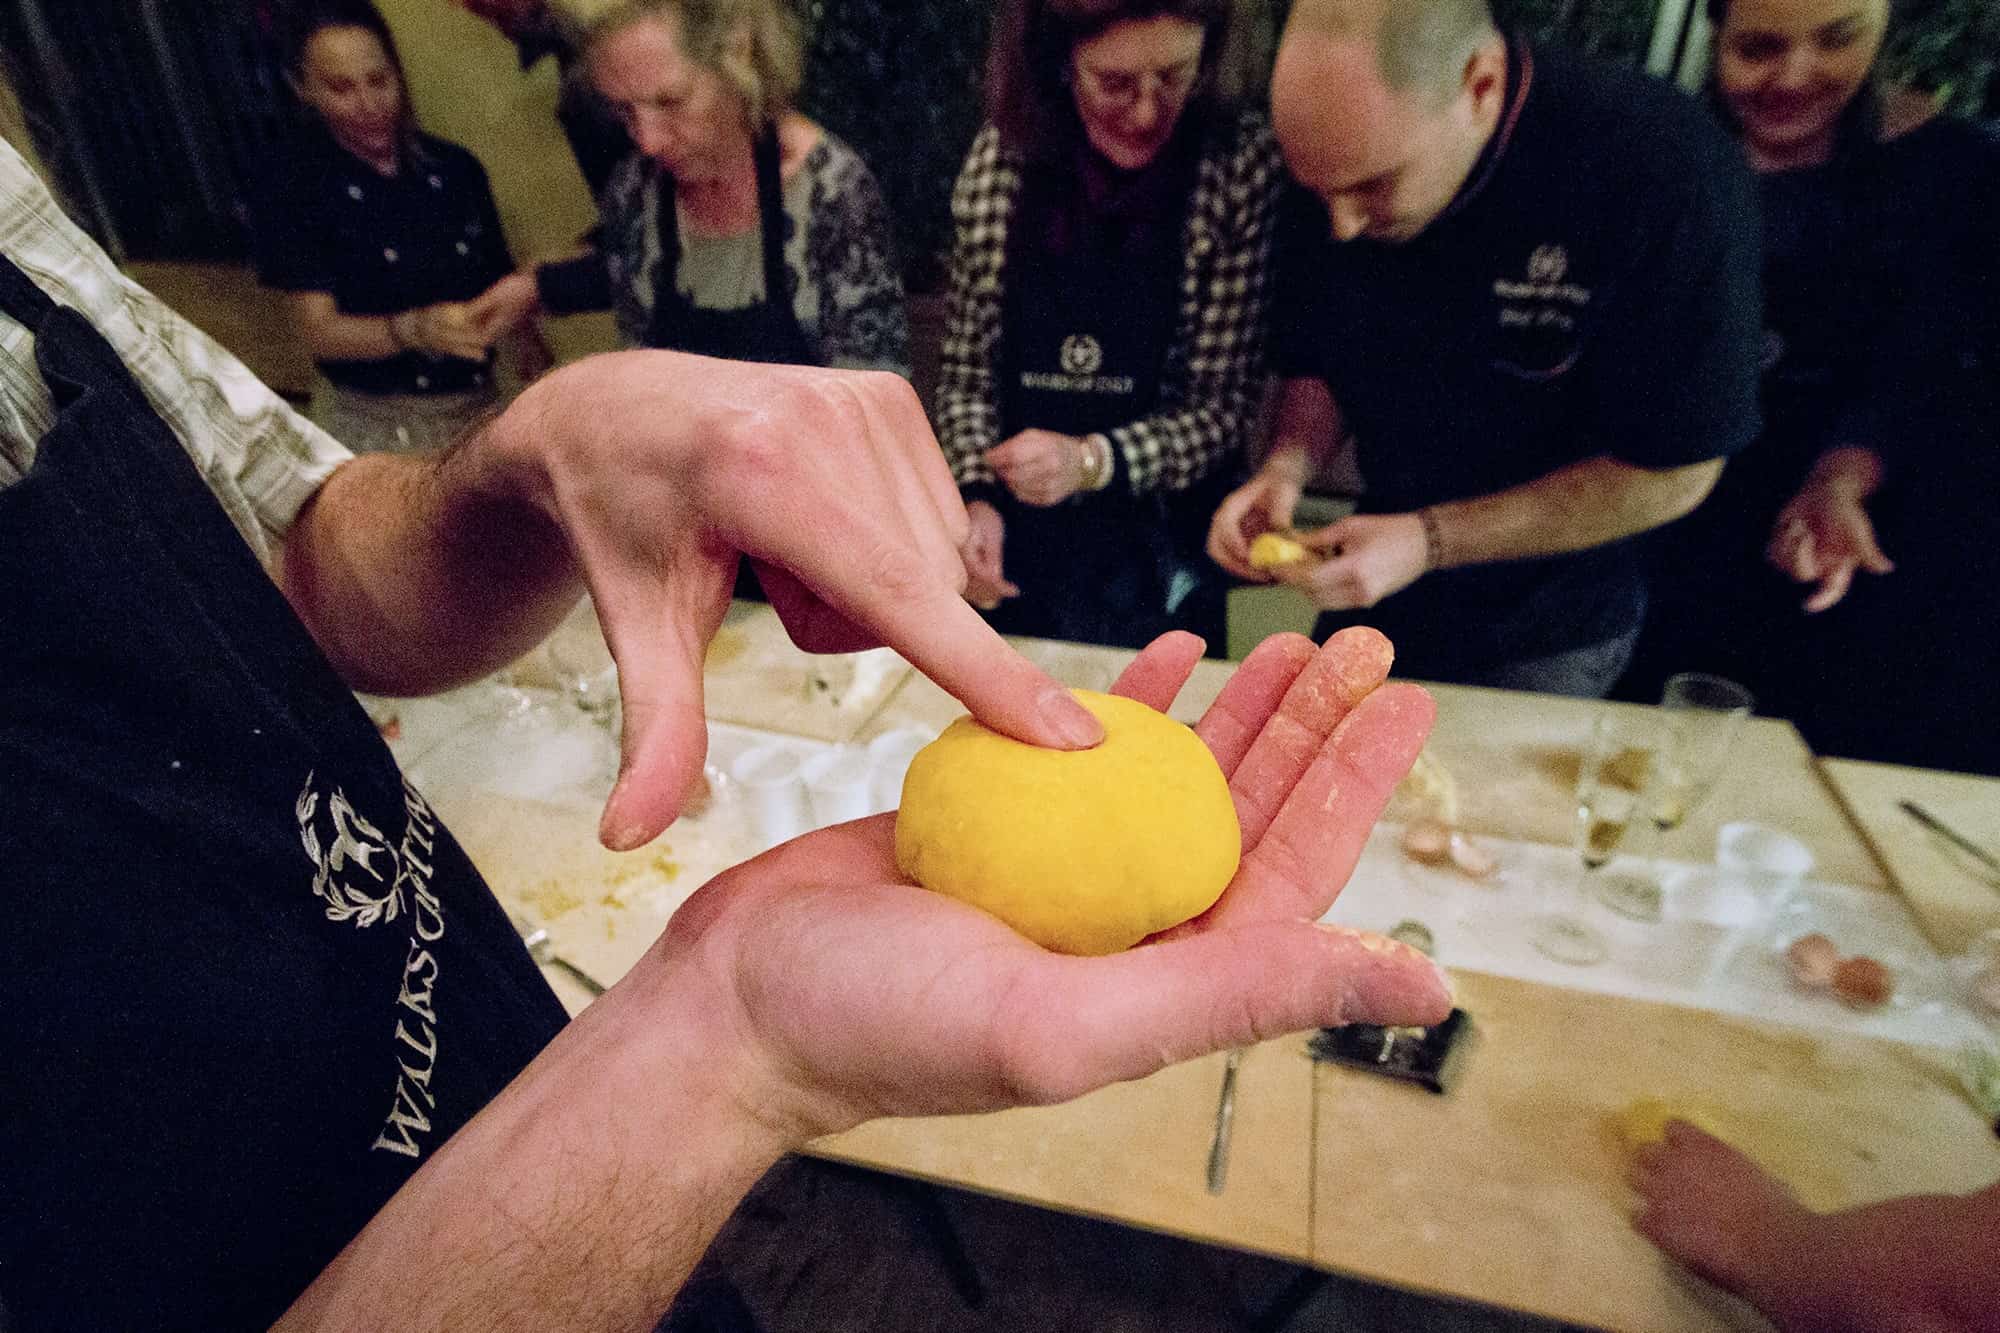 A chef shows how to test pasta dough in Rome, Italy